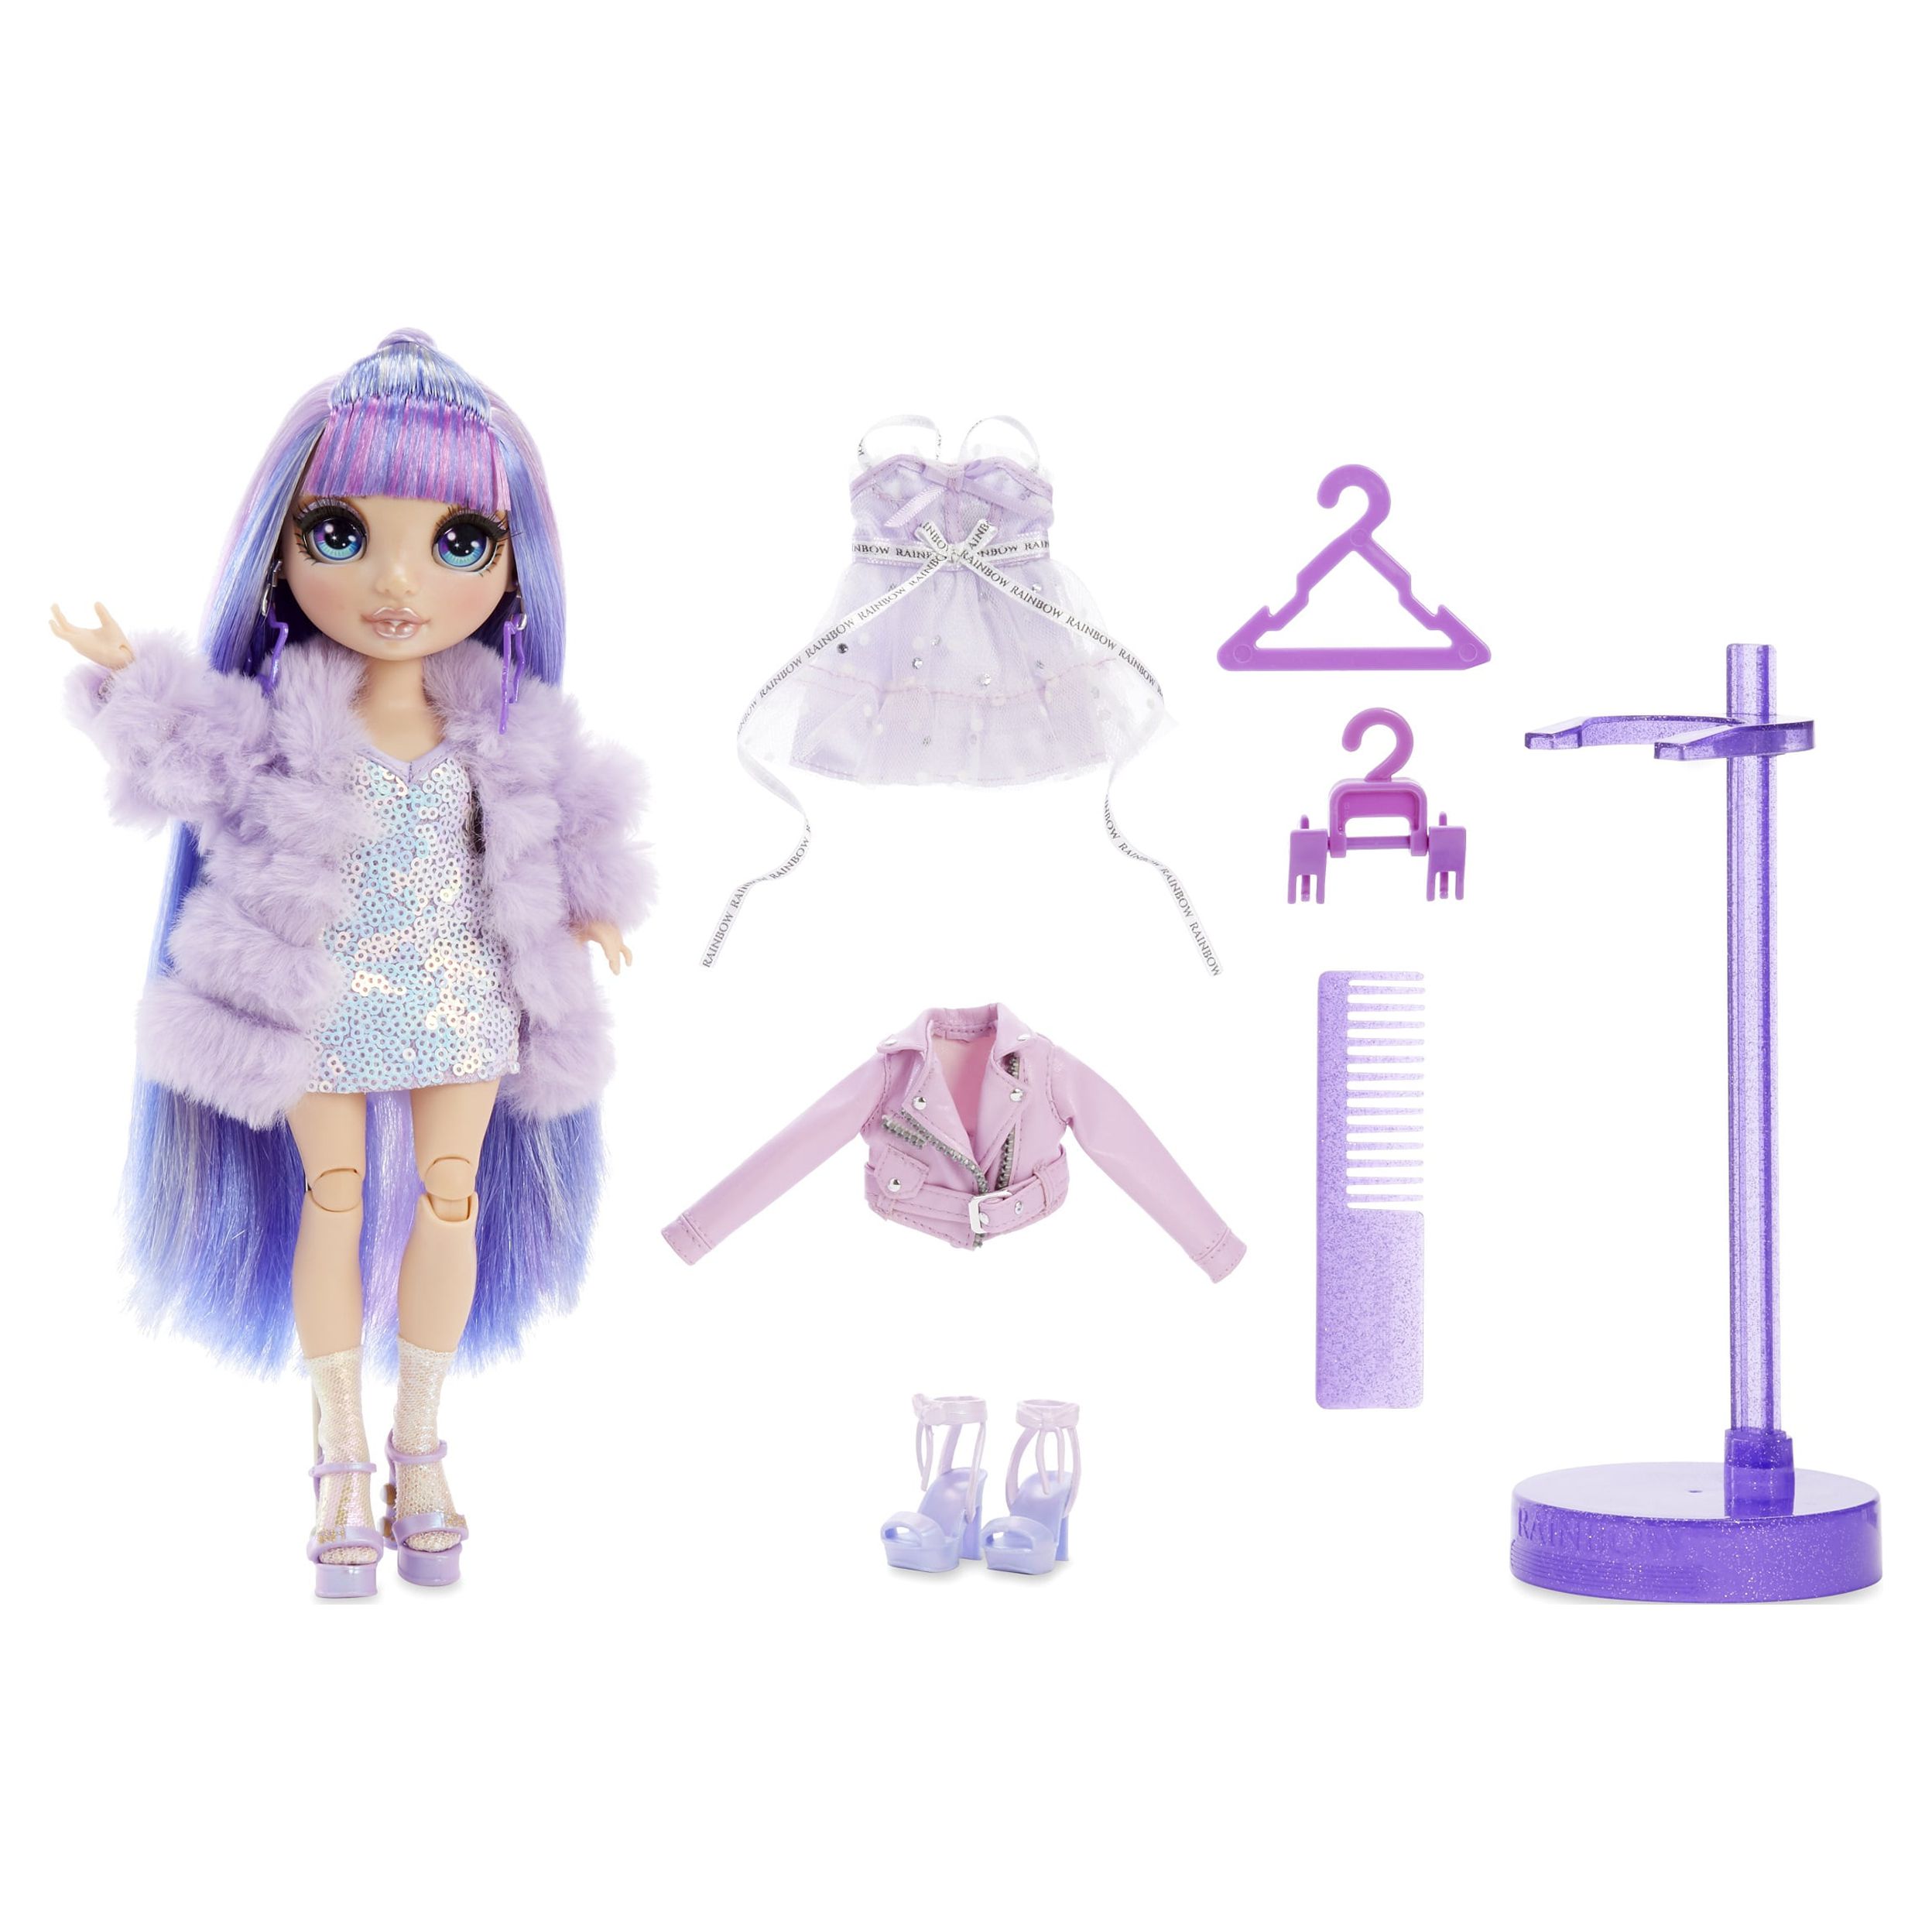 Rainbow High Violet Willow – Purple Fashion Doll with 2 Outfits - image 1 of 9